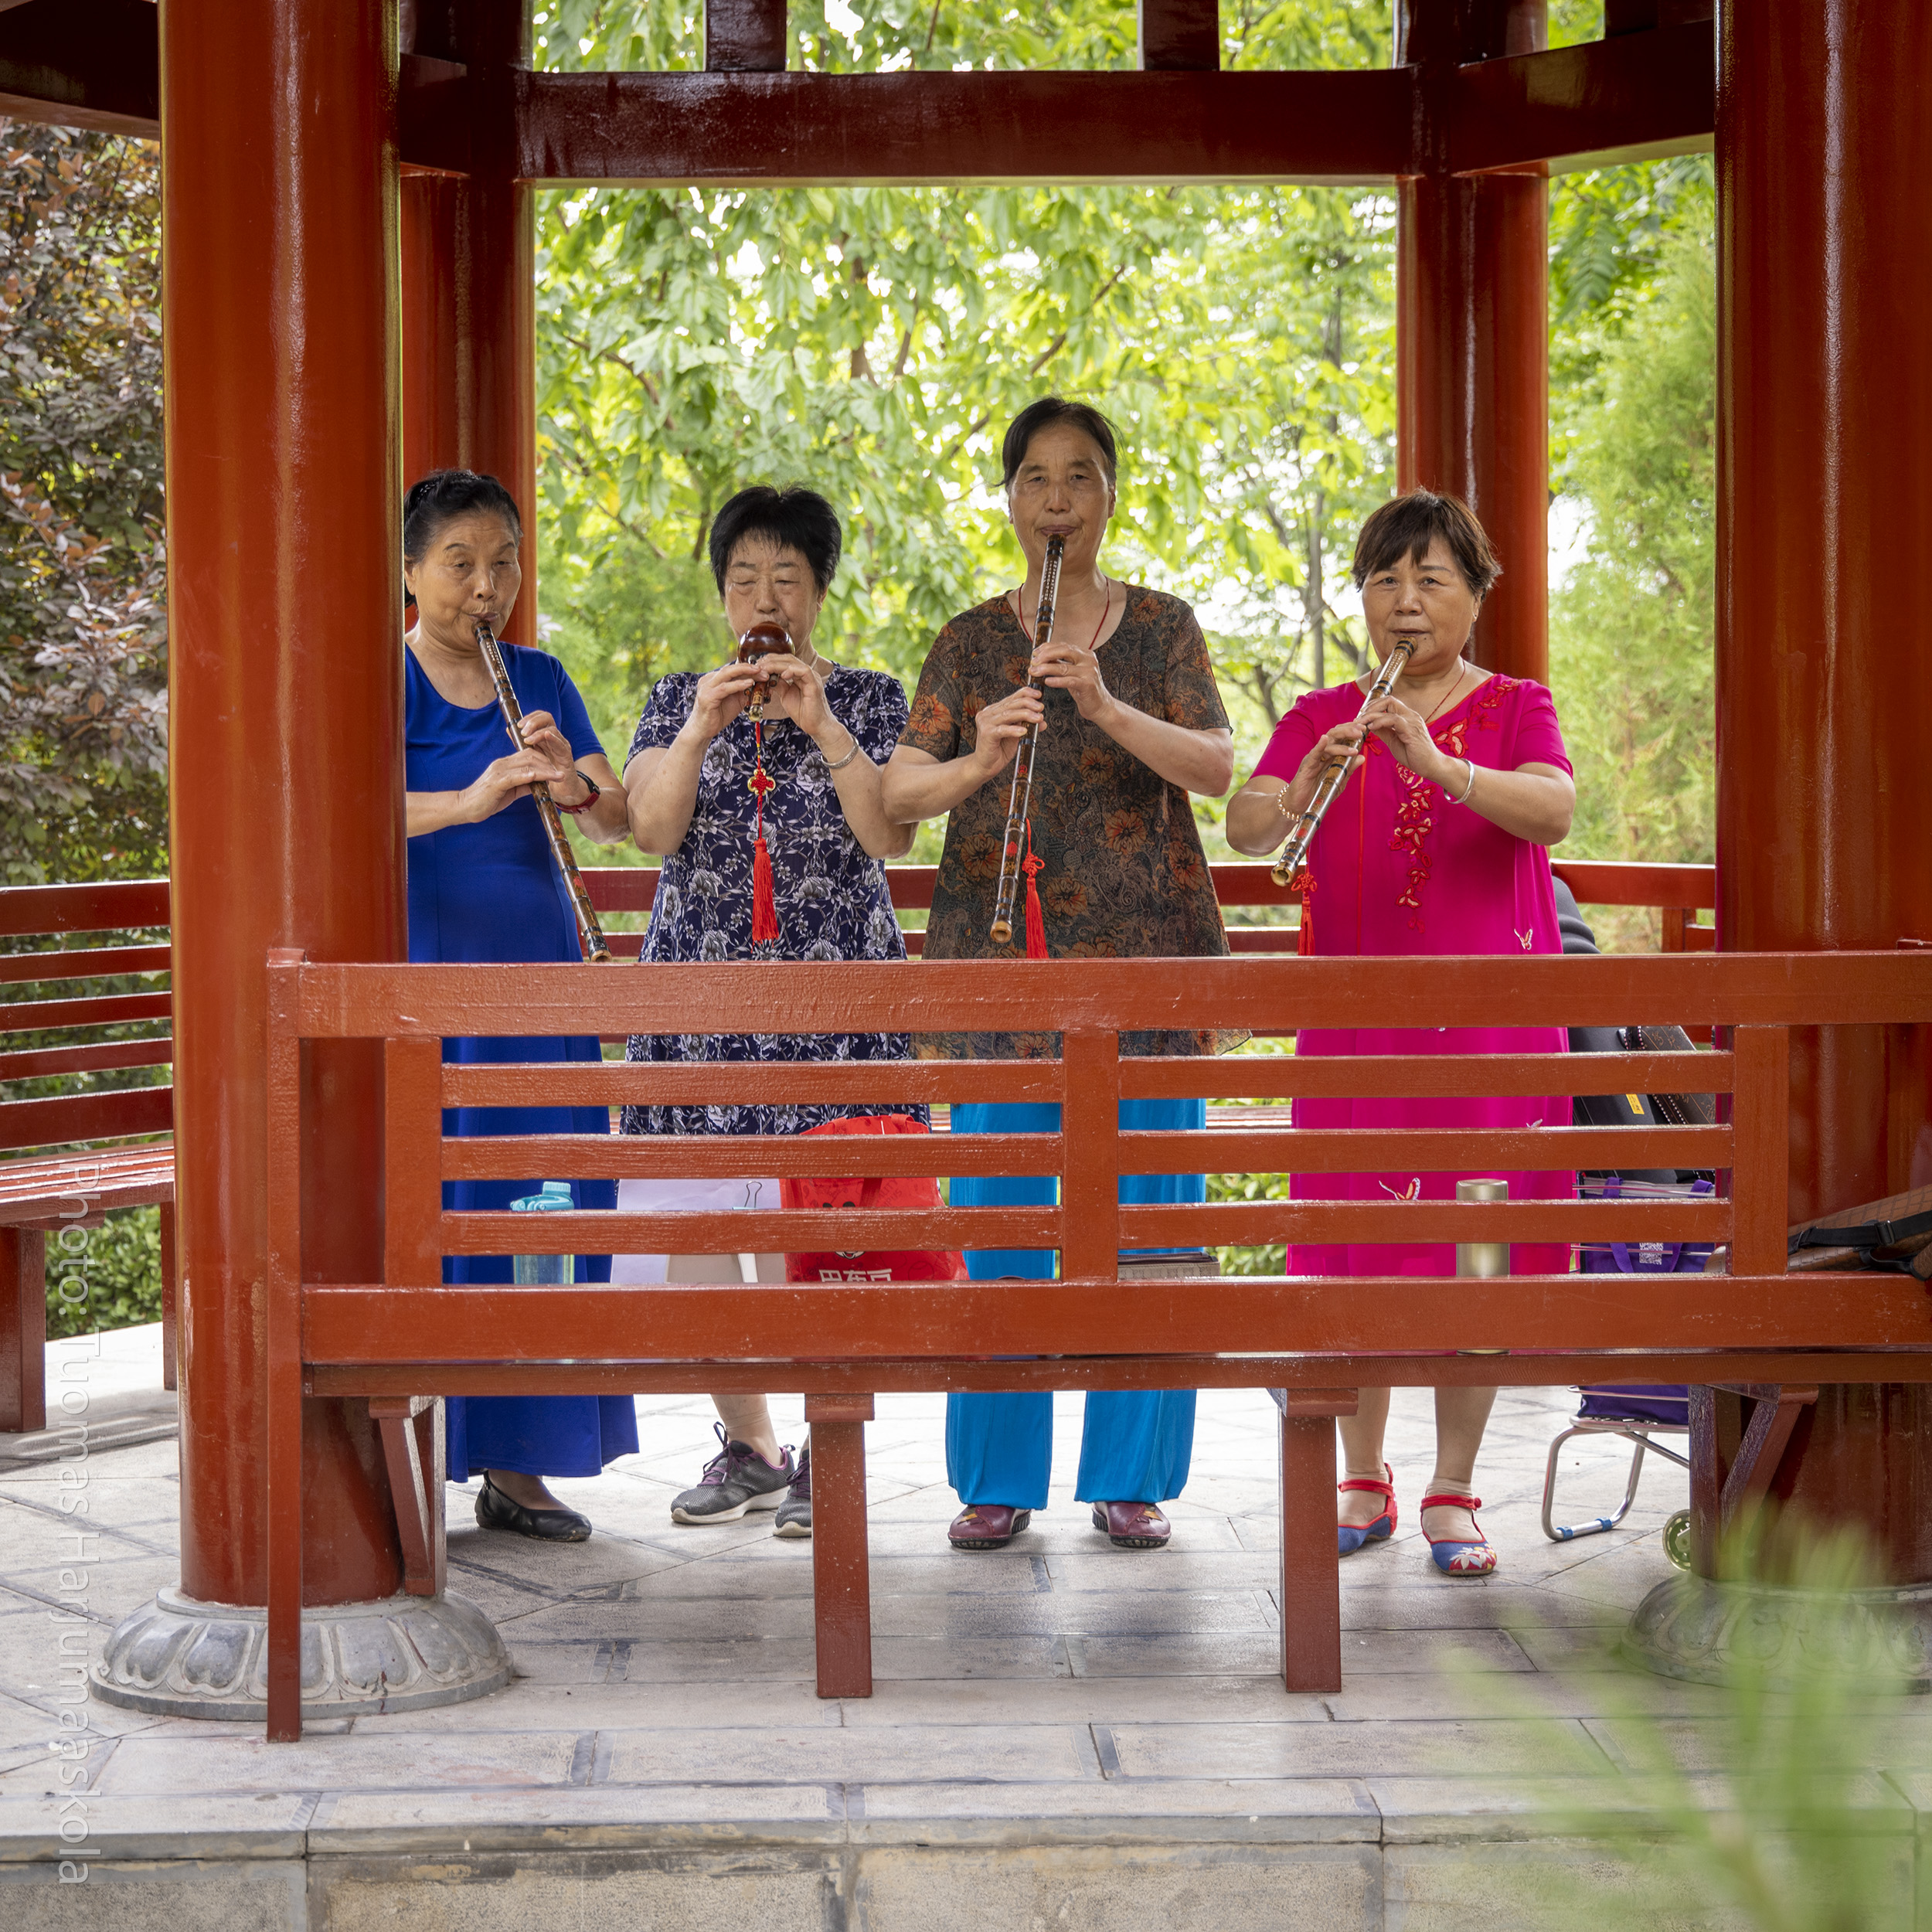 A group of Chinese women playing flutes in a pavilion in a park. Photographer Tuomas Harjumaaskola.